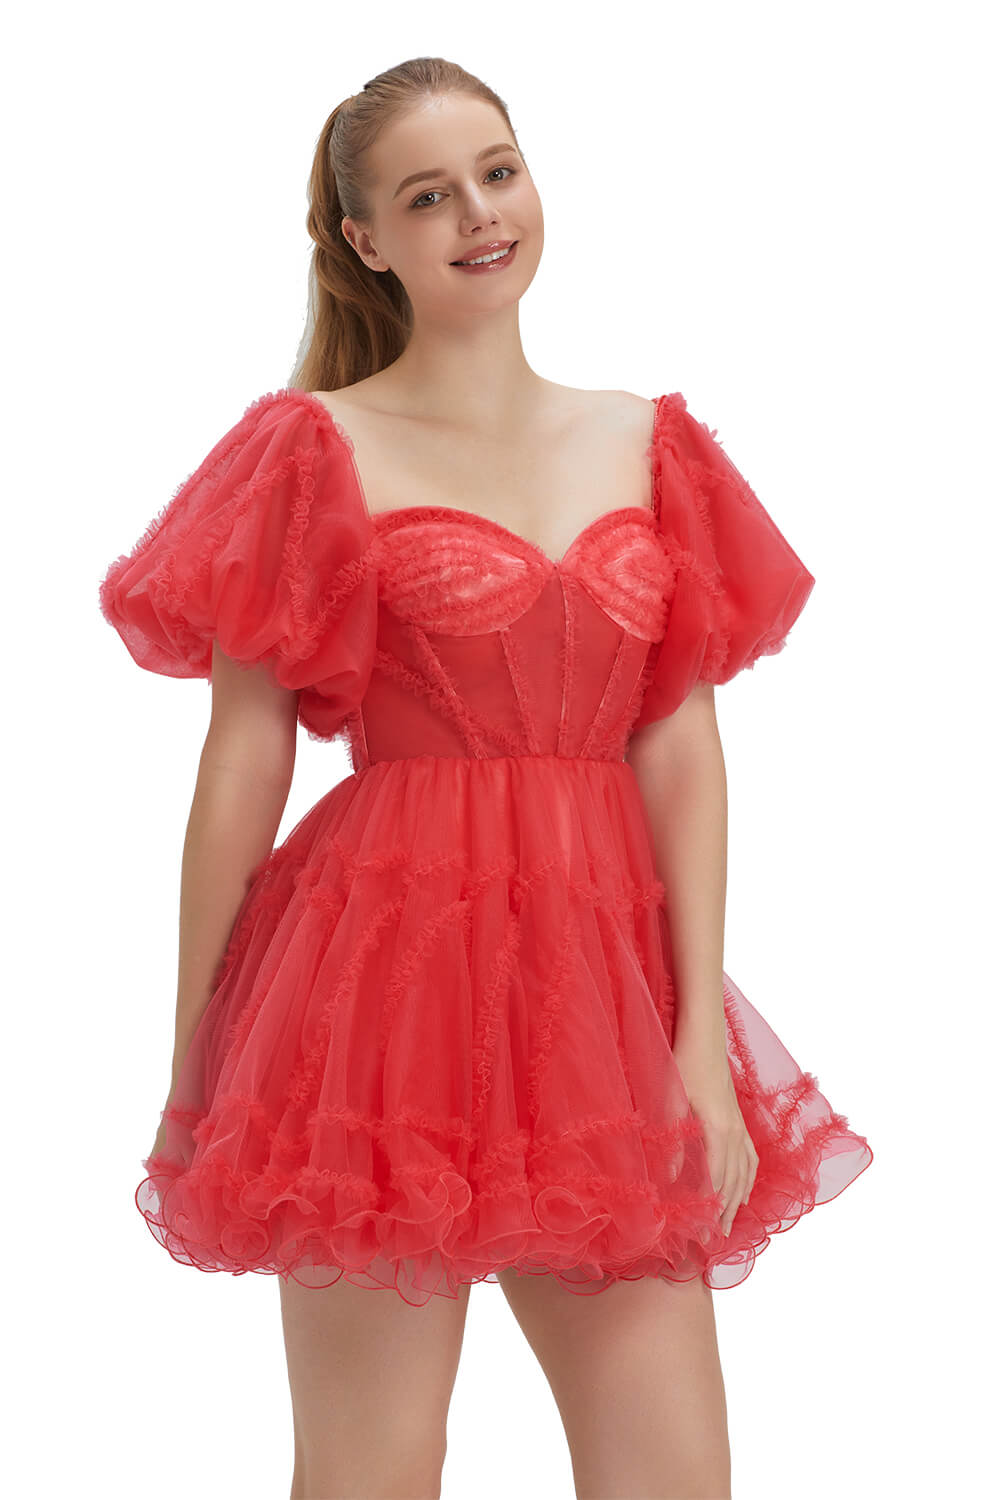 Hebochic Puff Sleeve Homecoming Dresses Short Sweetheart Tulle Prom Dresses Ruffle Cocktail Dresses